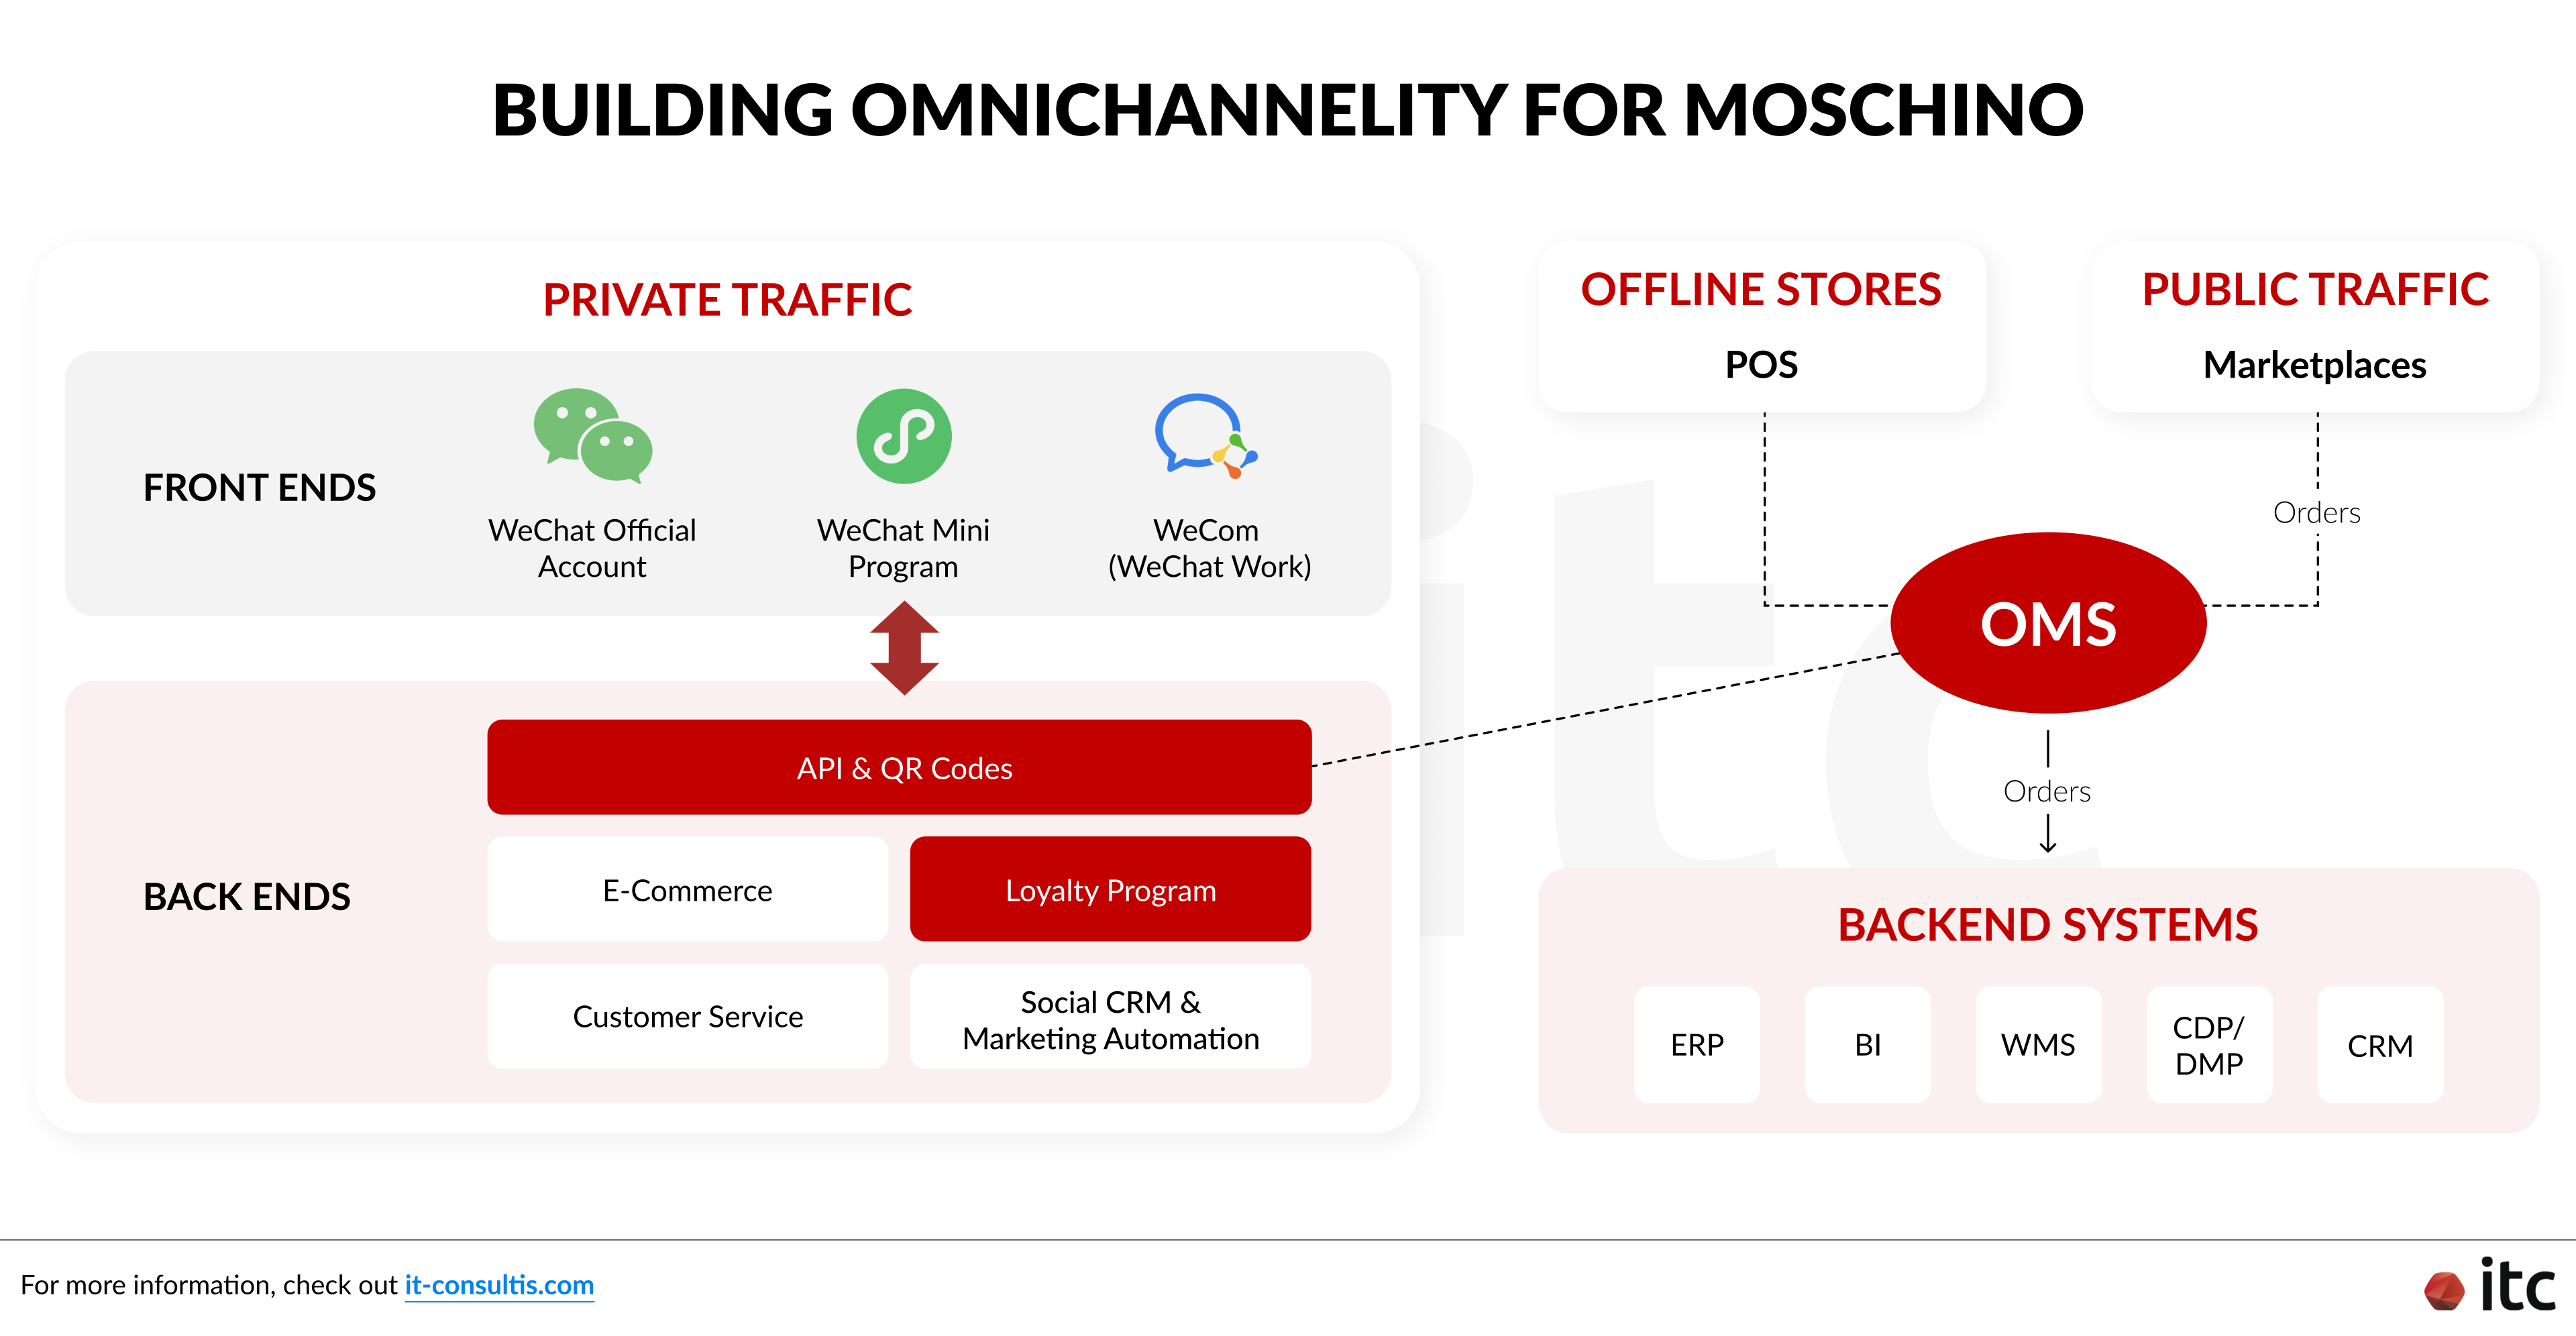 Building Omnichannelity for Moschino streamlining data flow throughout Private Traffic, Public Traffic, and Offline channels